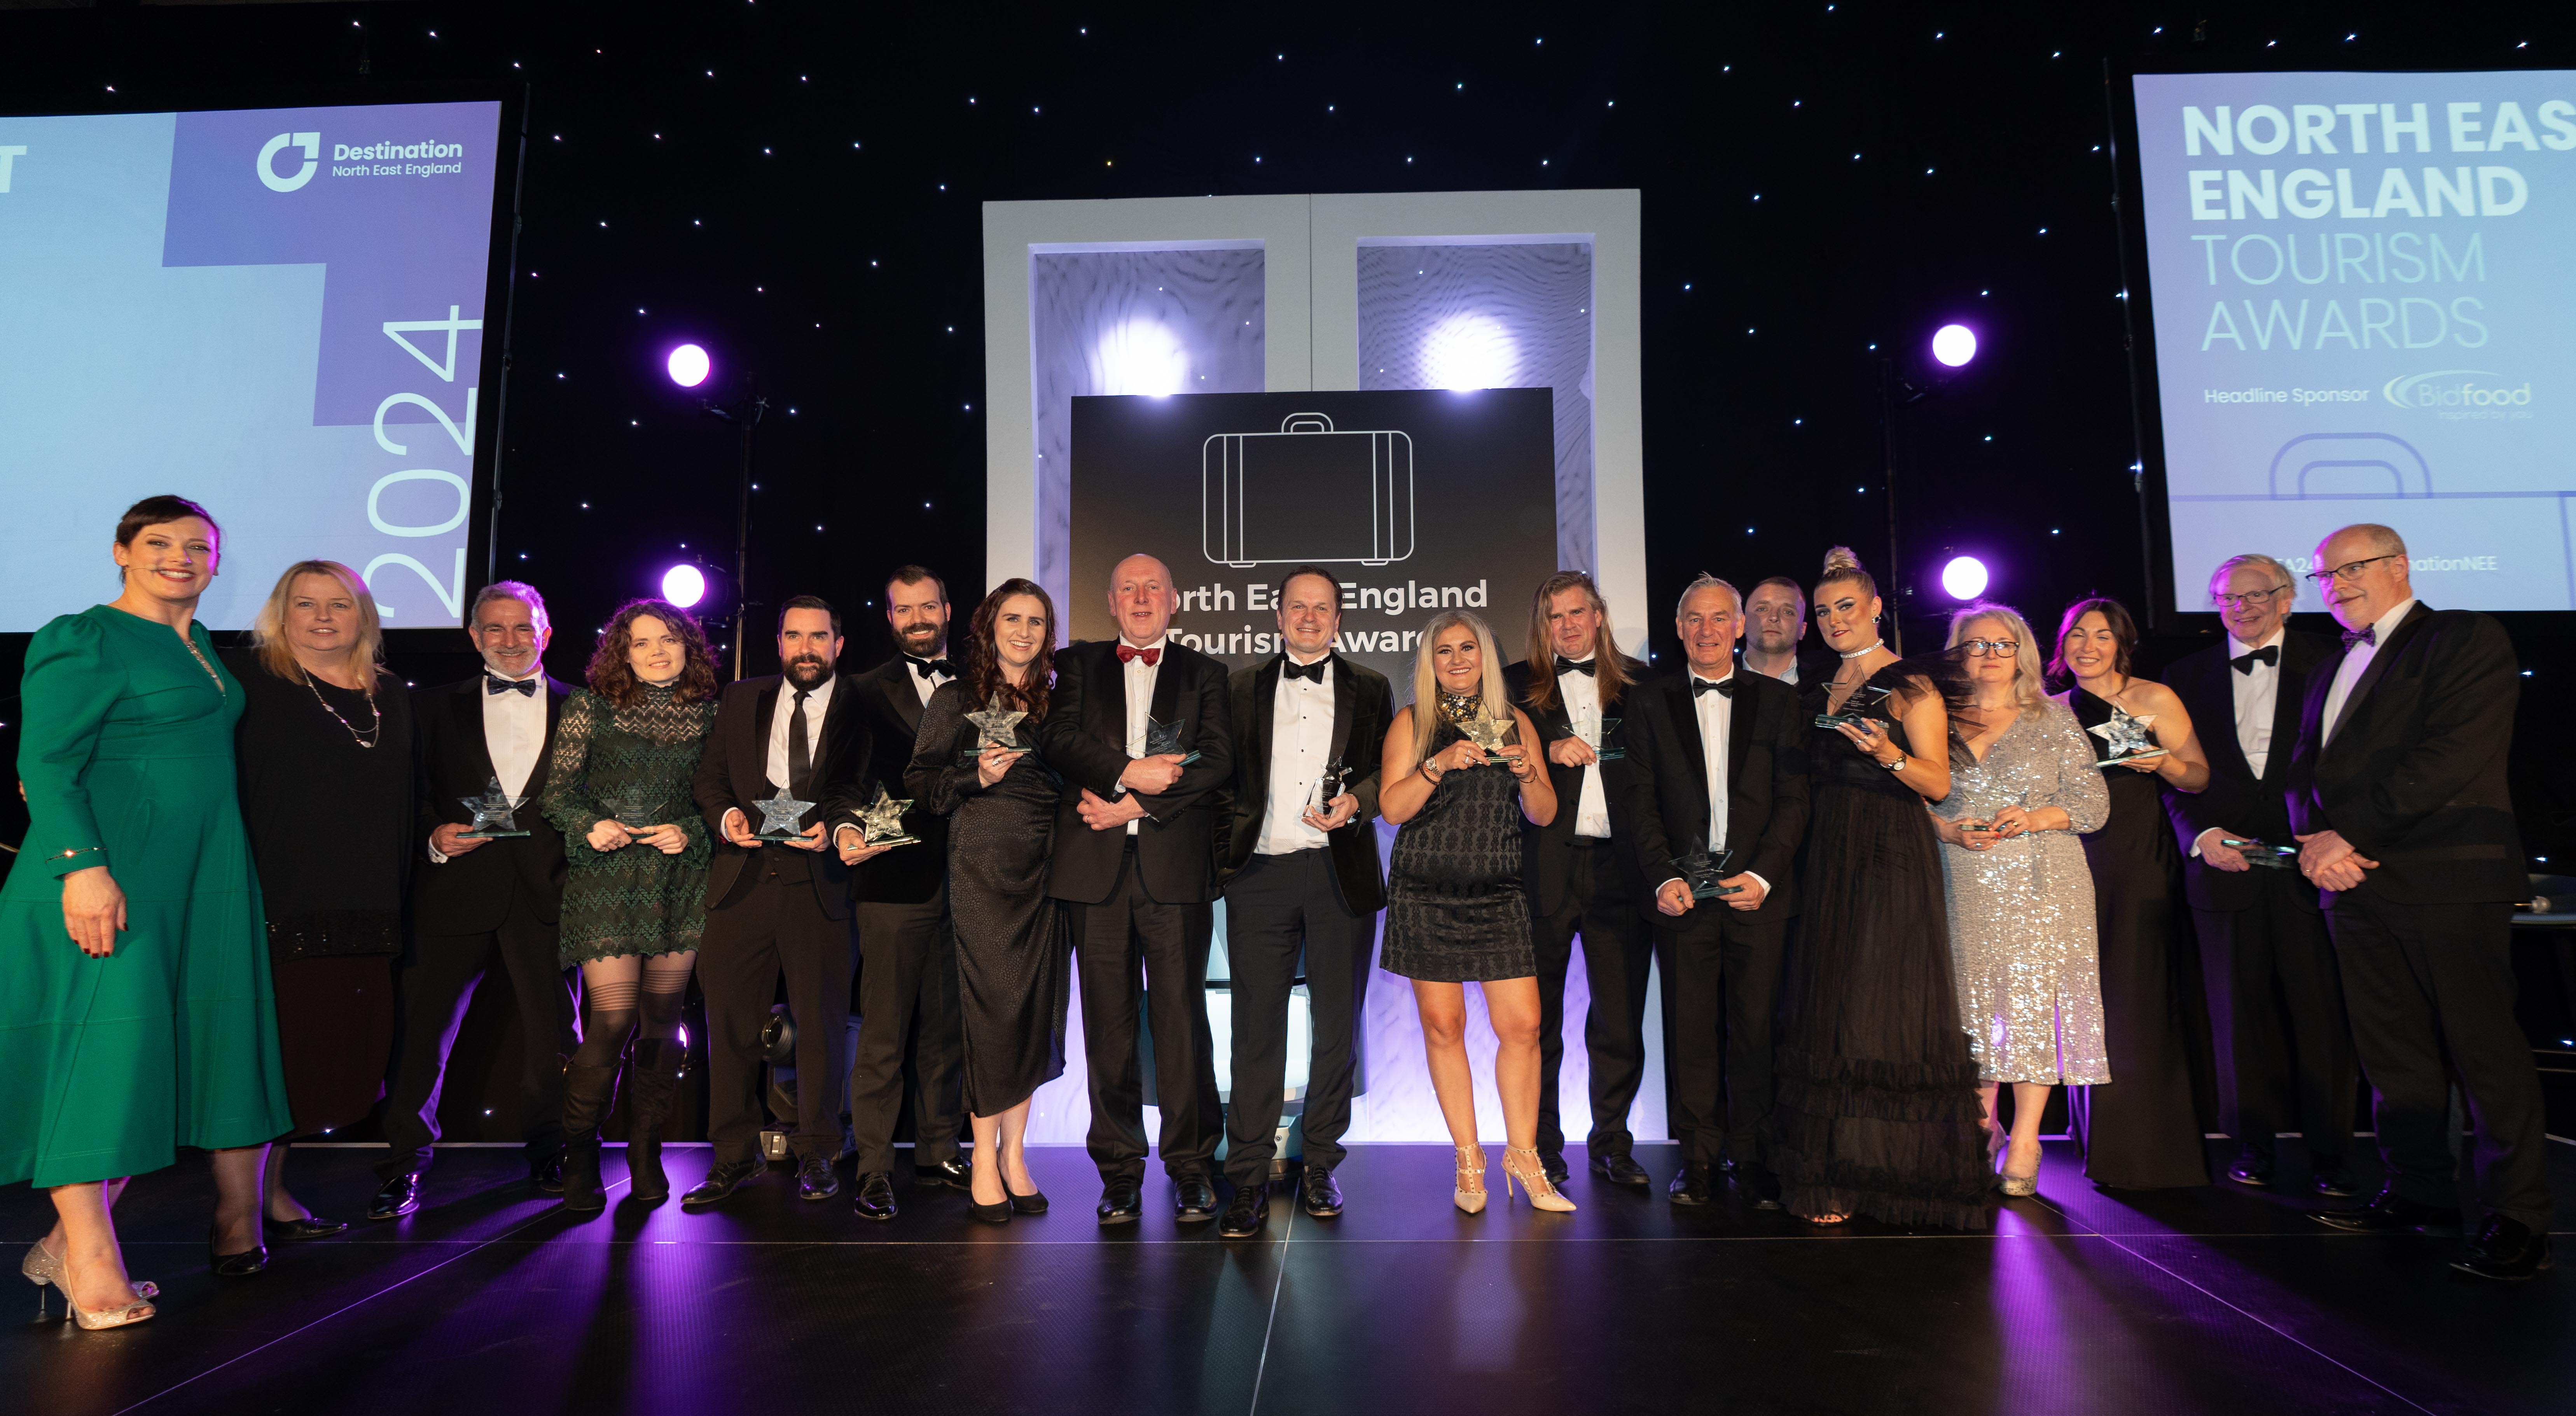 Group photo of Tourism Awards winners on stage together with their awards.